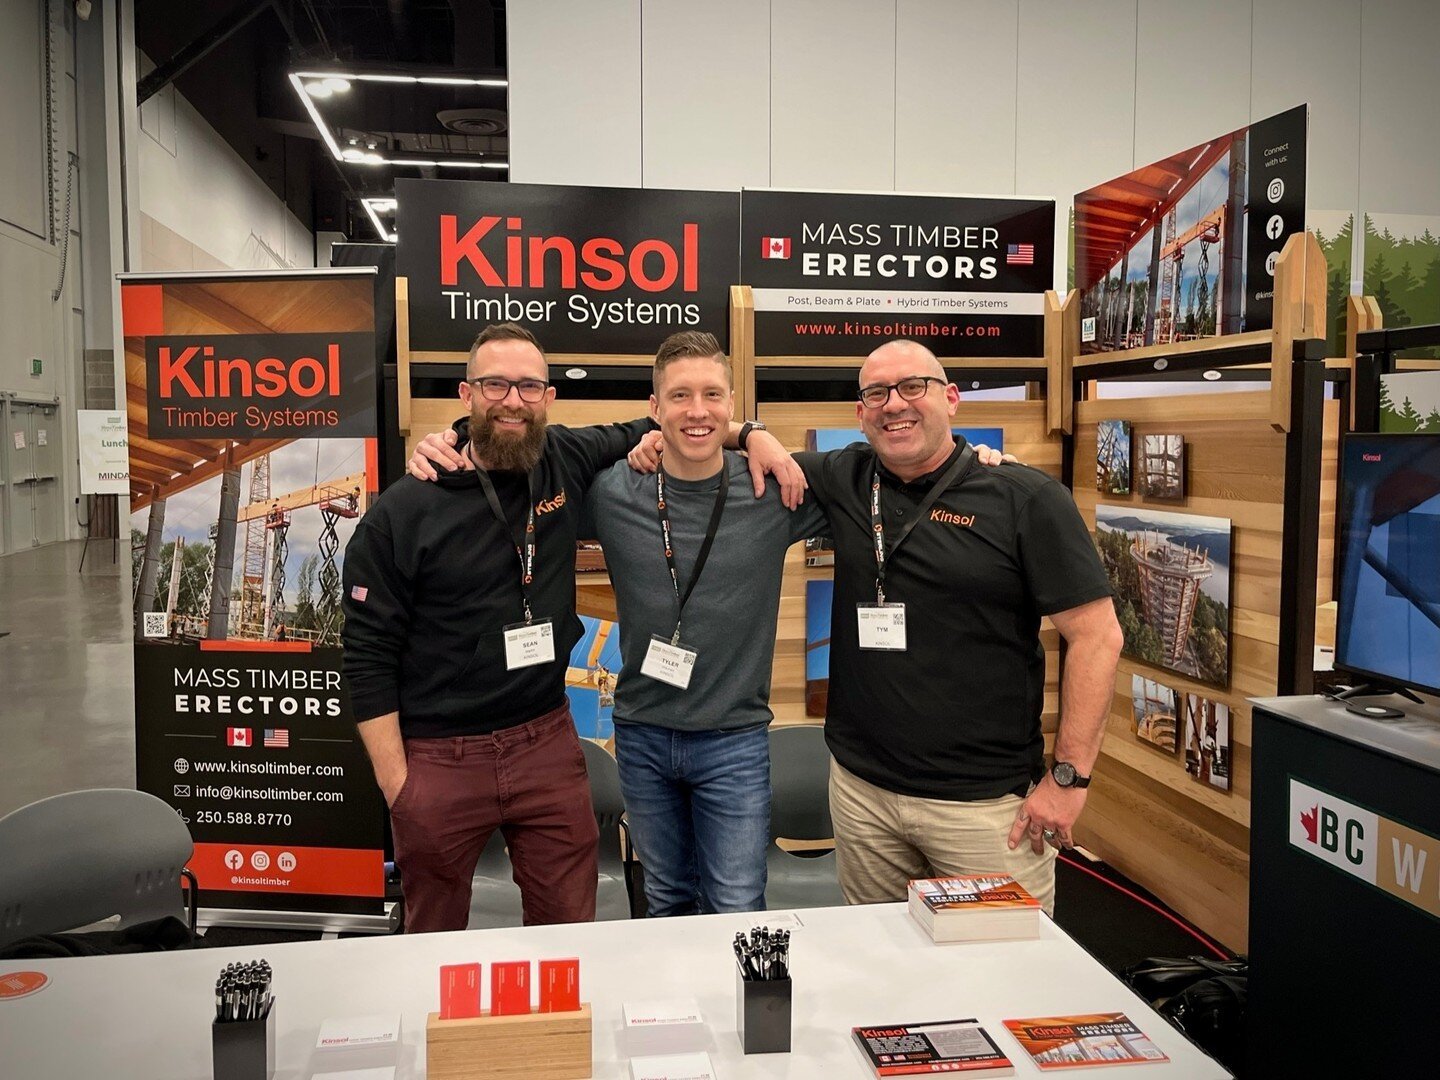 Another year at the International Mass Timber Conference is a WRAP. A whirlwind of catching up with old friends, making new ones and talking shop, of course. ⁠
⁠
Thankyou to the @masstimberconference team for pulling together an incredible event once